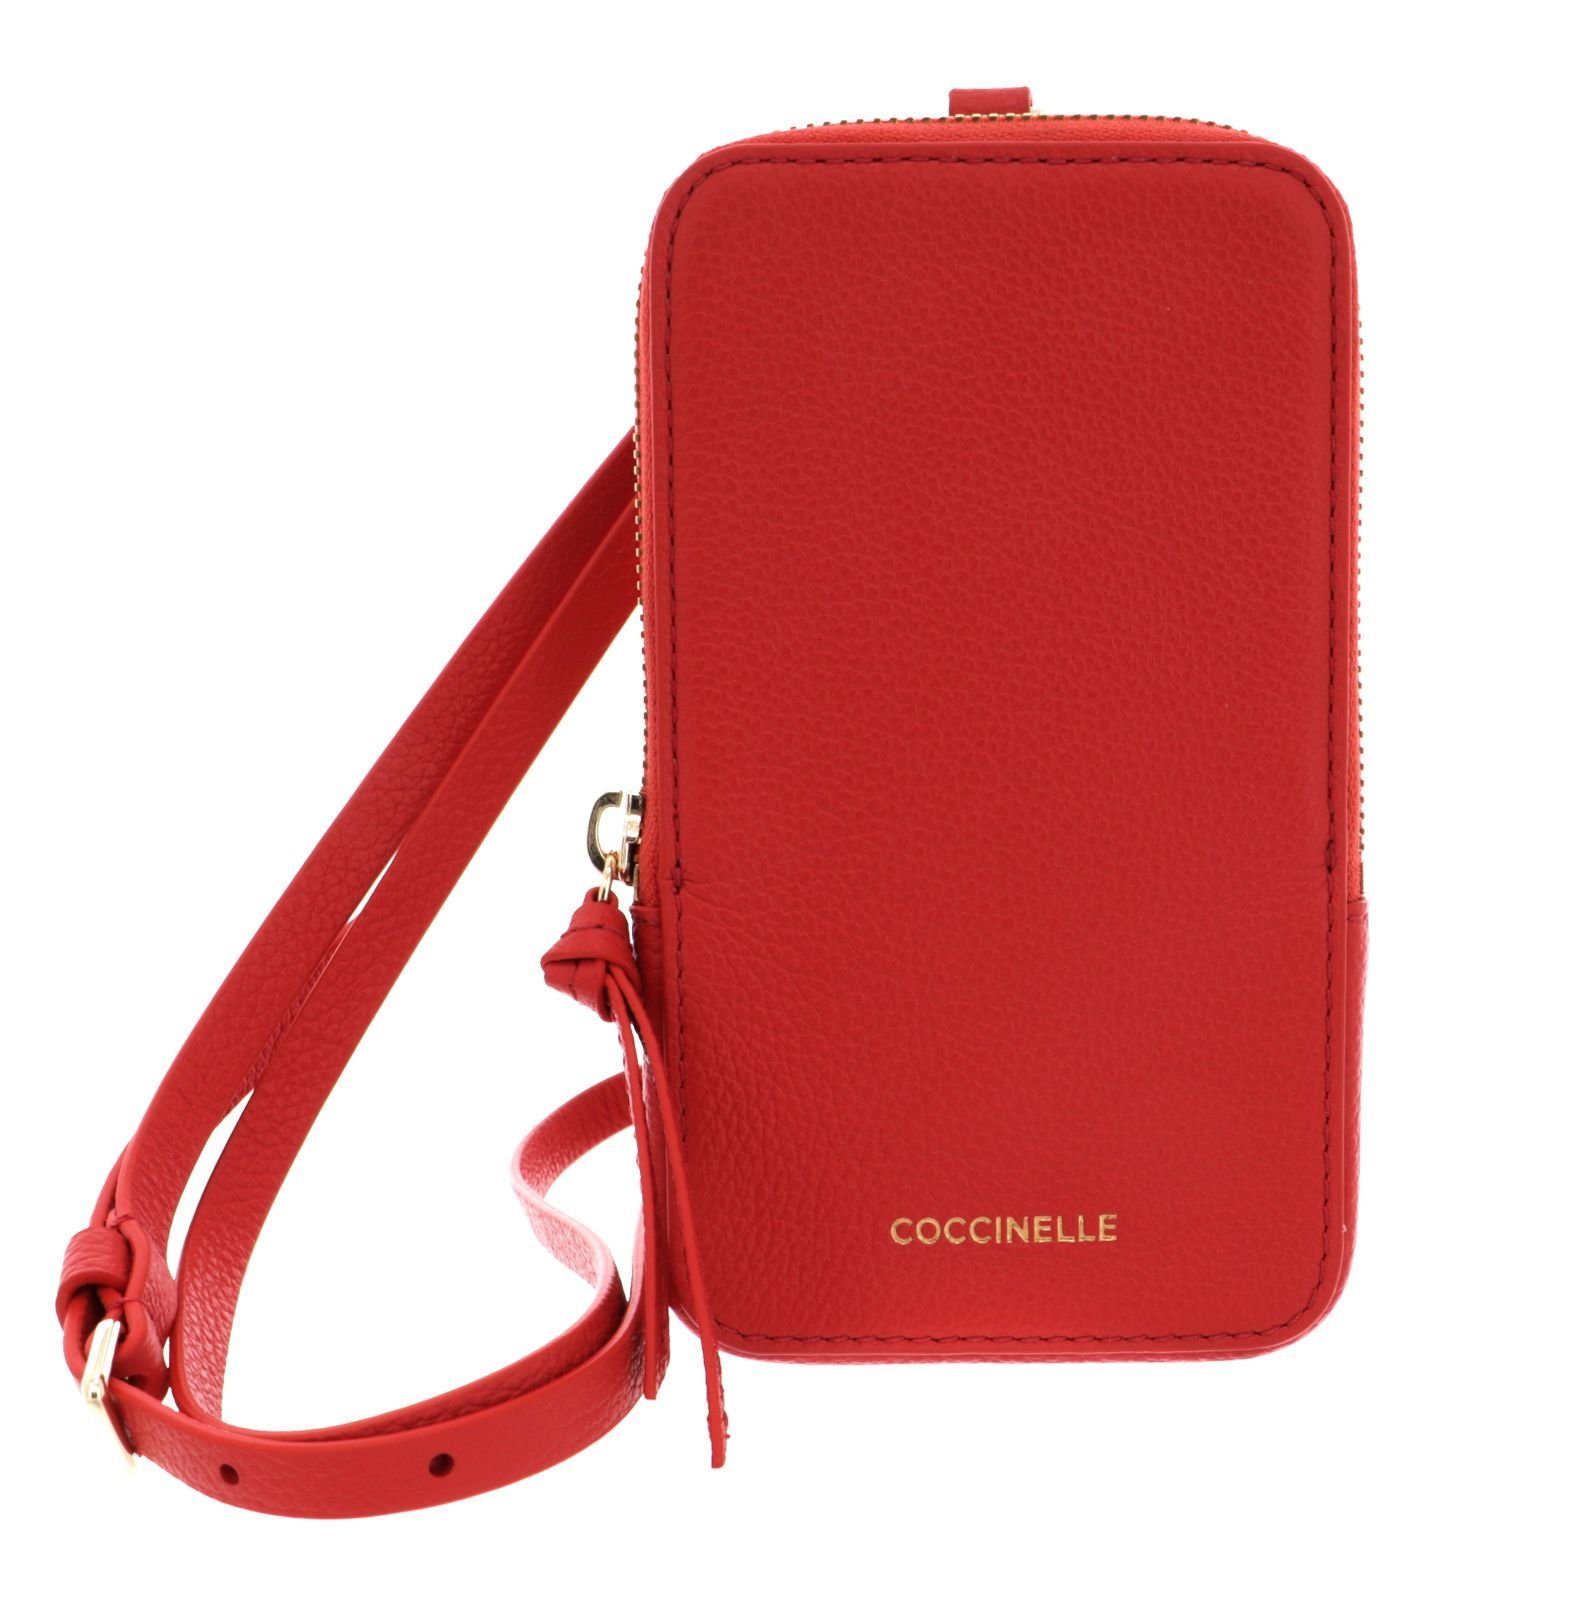 COCCINELLE Brustbeutel Tresor Coral Red